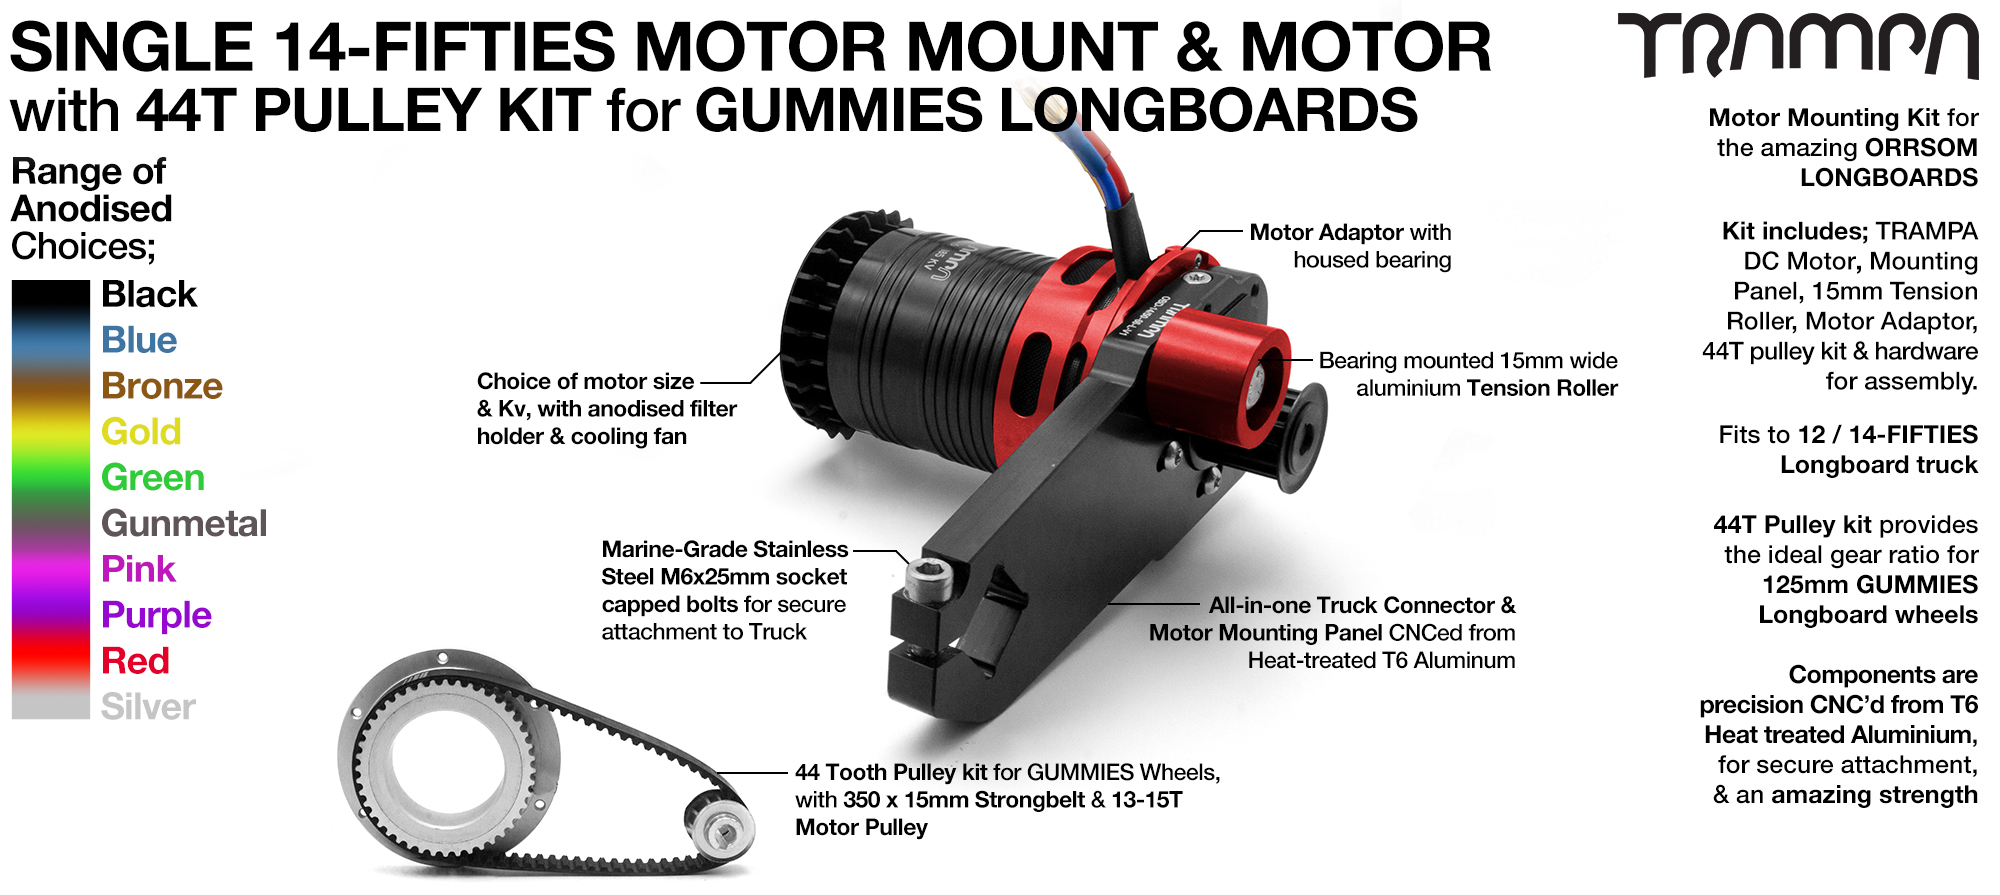  14FiFties Motor Mount with Custom Motor & 44 Tooth Pulley Kit for GUMMIES Wheels - SINGLE